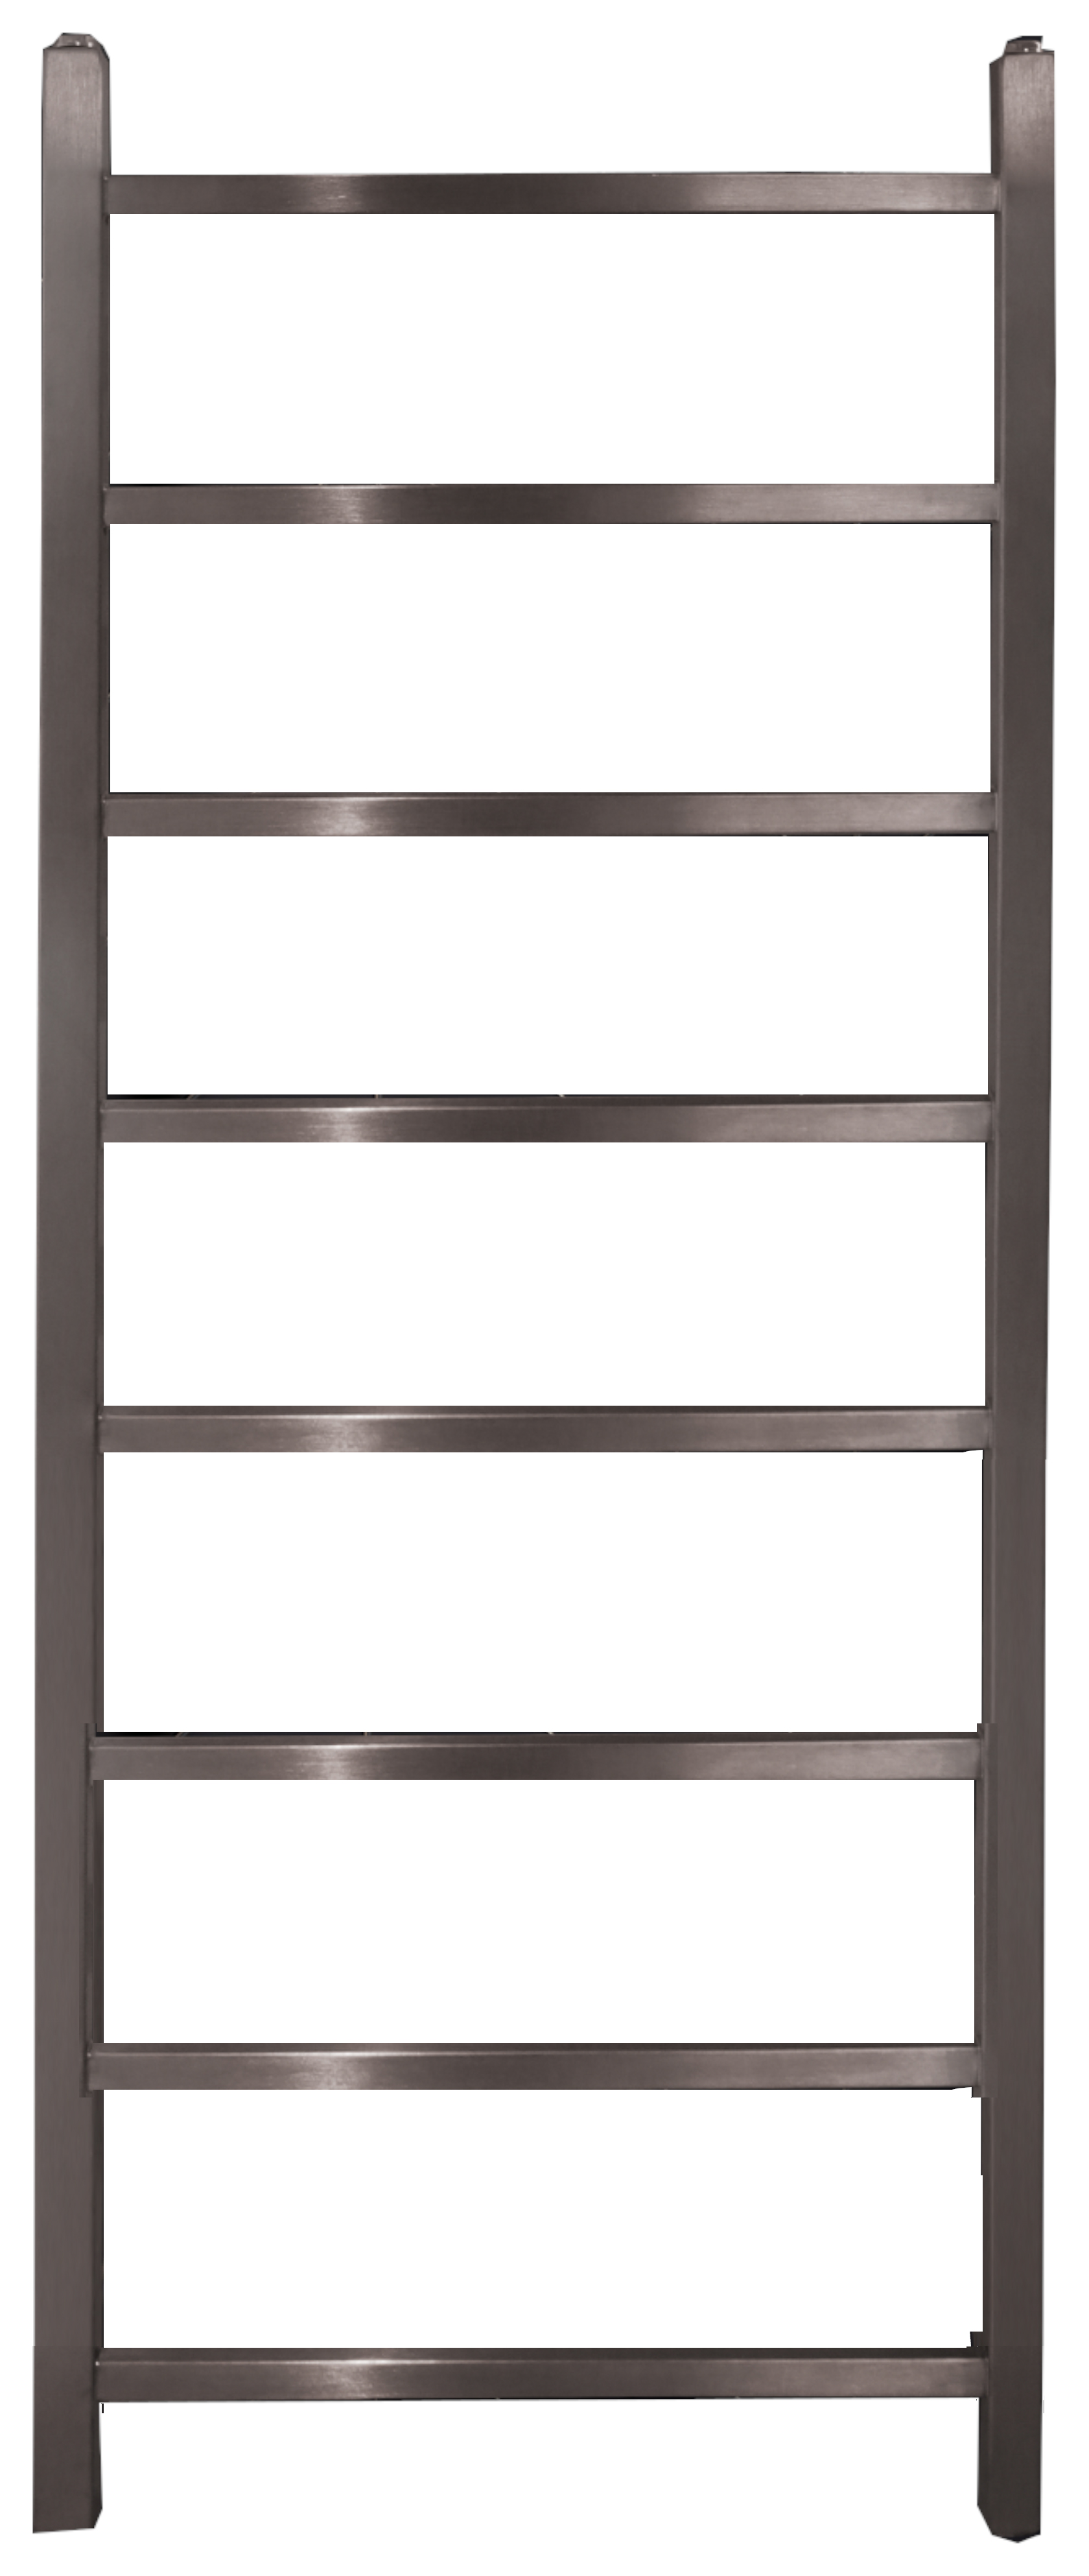 Image of Towelrads Diva Brushed Stainless Steel Dry Electric Non Thermostatic Towel Radiator - 1200 x 500mm